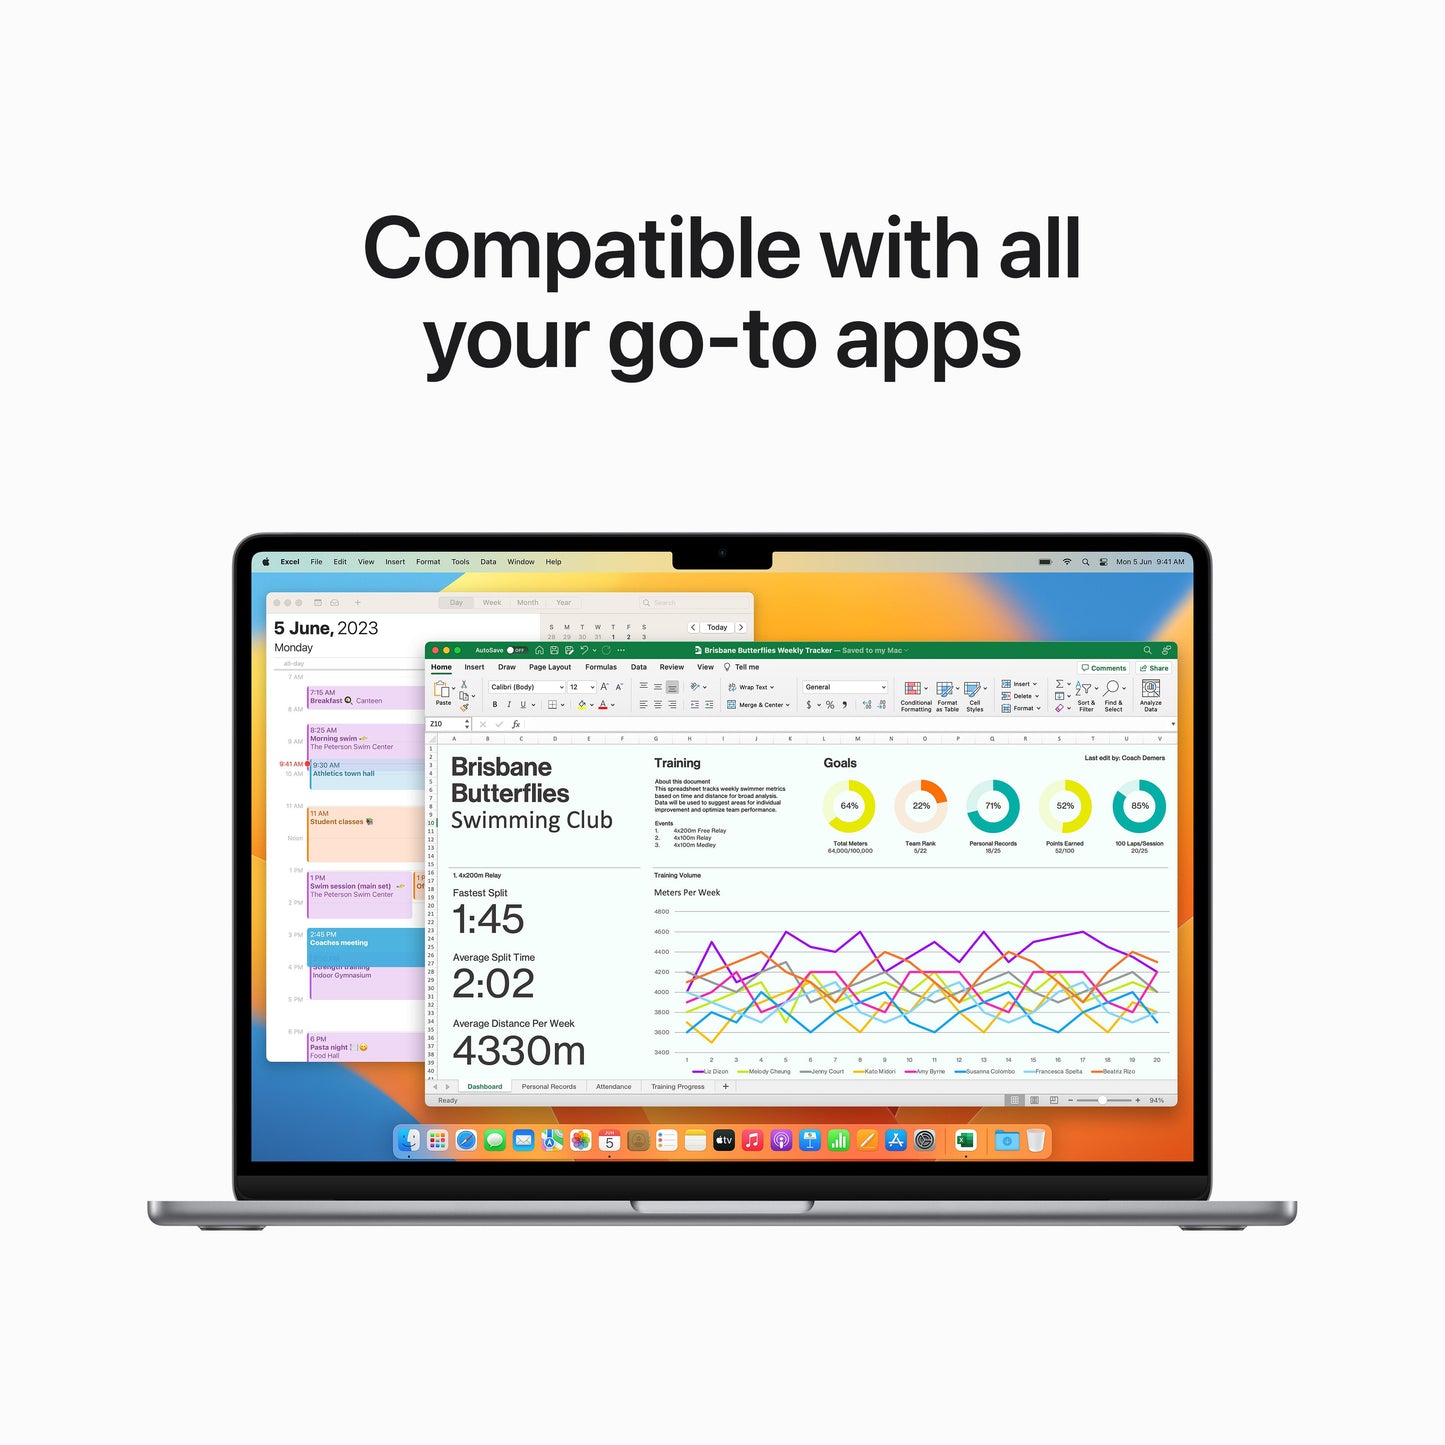 15-inch MacBook Air: Apple M2 chip with 8_core CPU and 10_core GPU, 512GB SSD - Space Grey